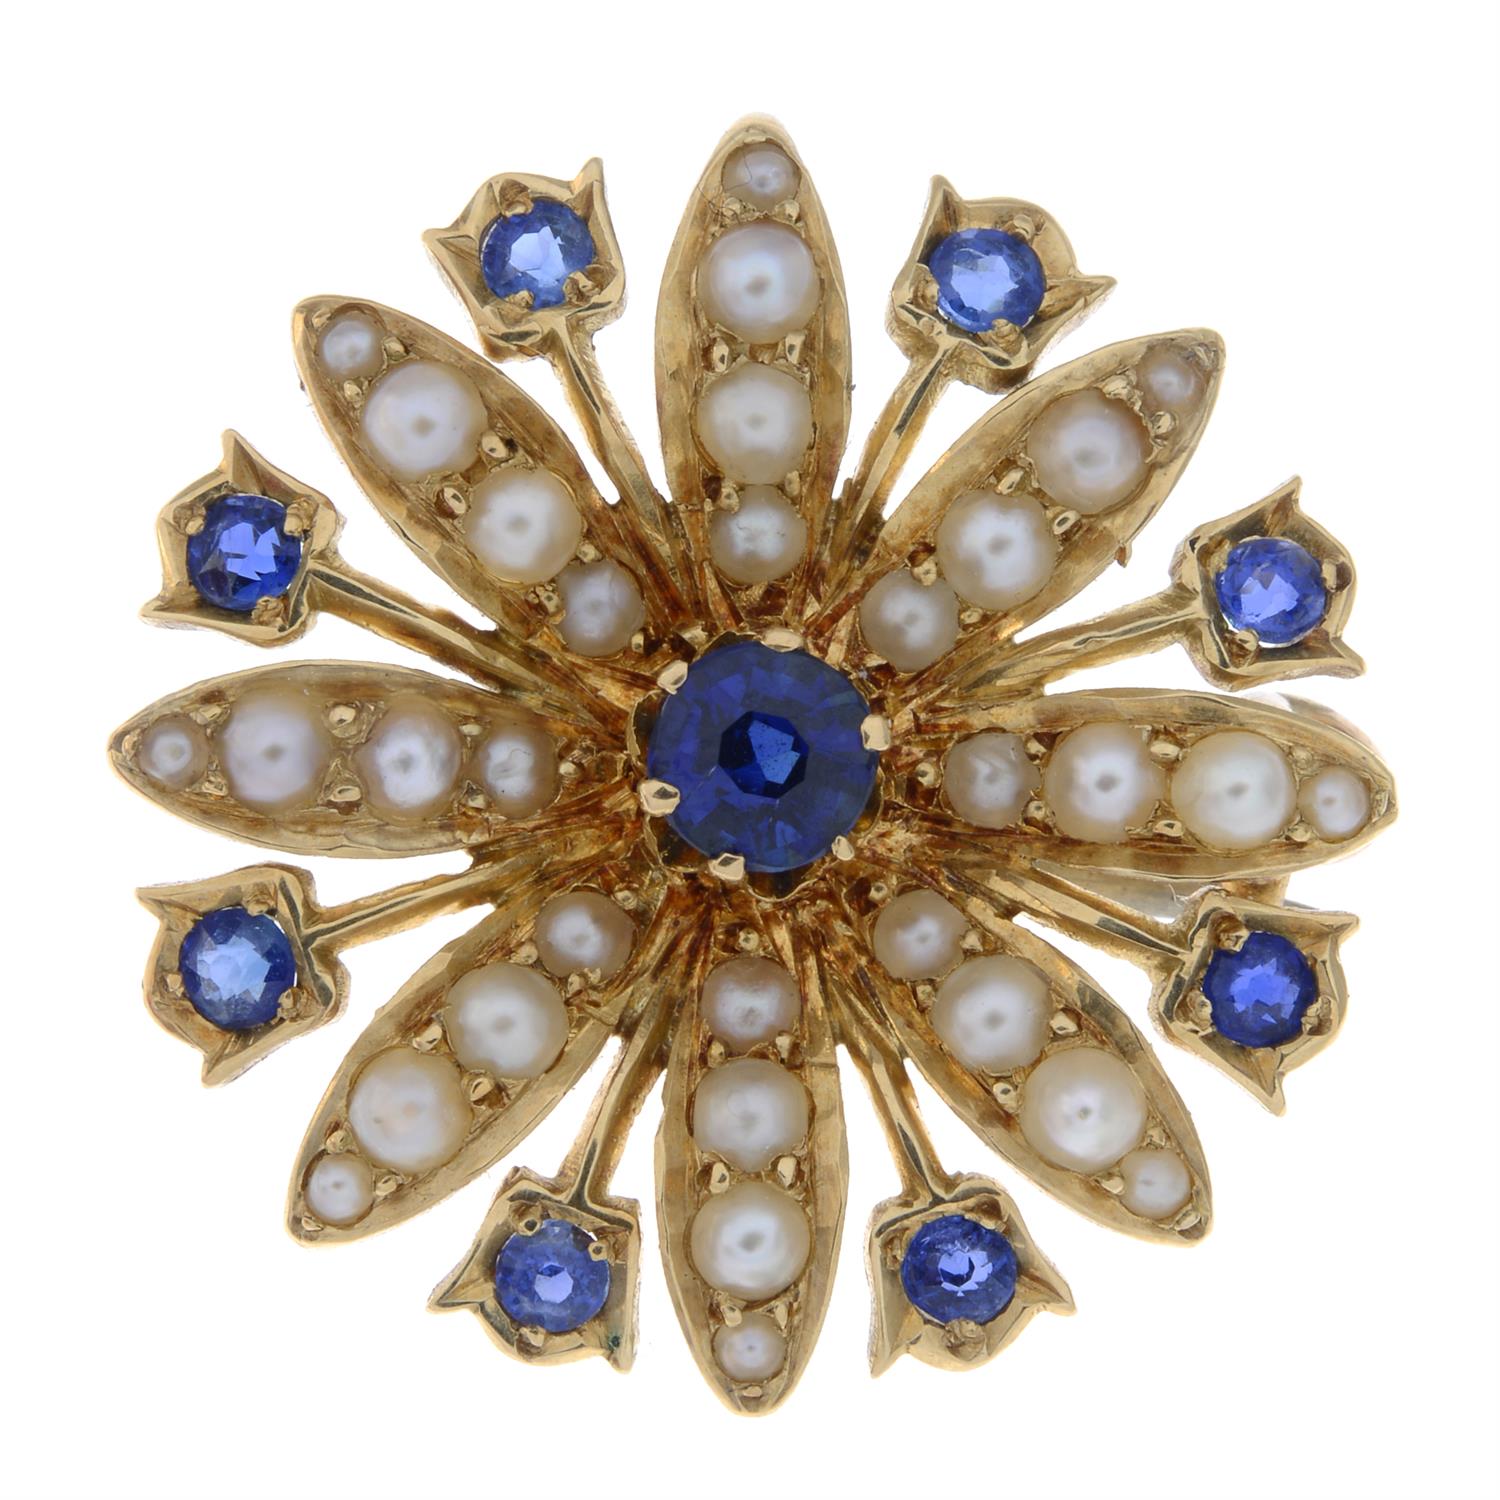 Early 20th century sapphire & split pearl floral pendant/brooch